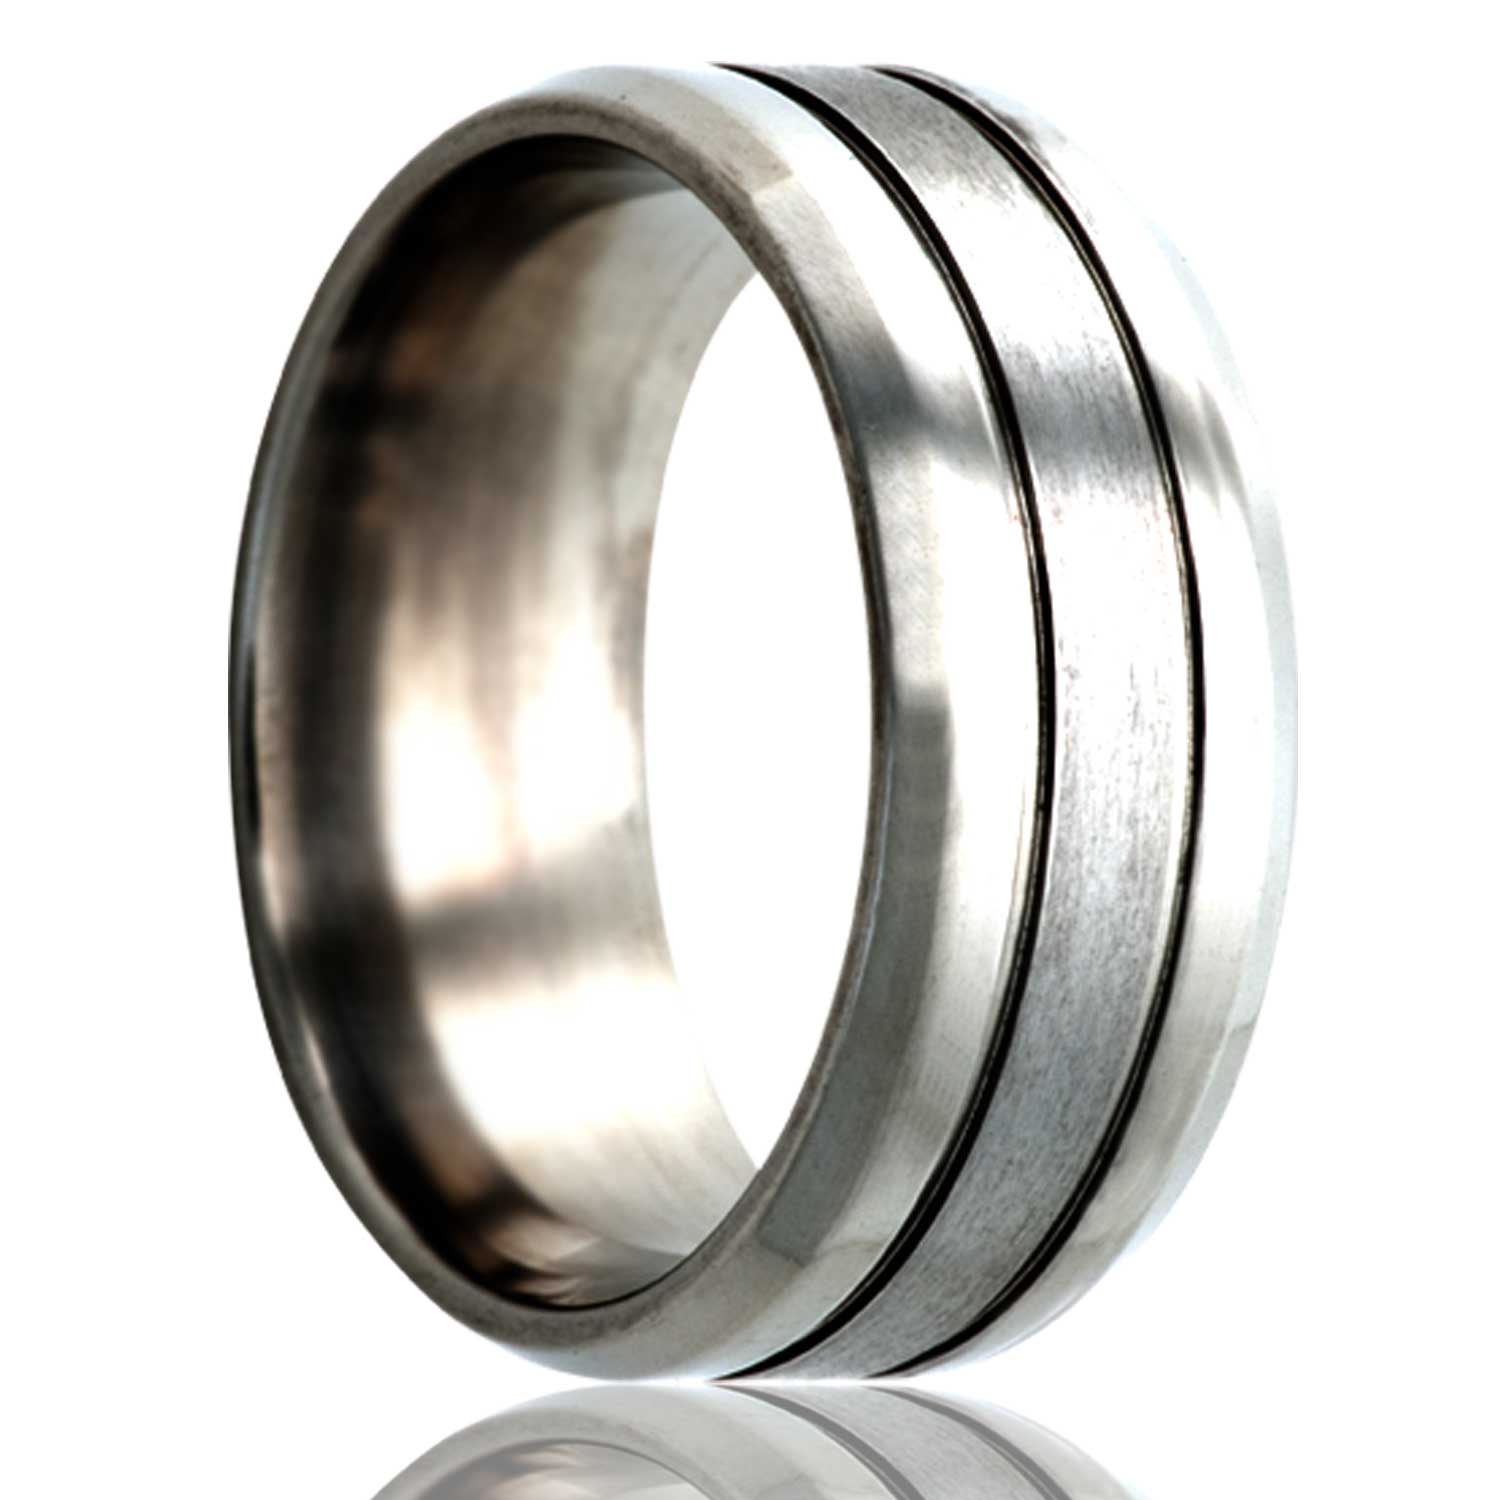 A satin finish grooved titanium wedding band with beveled edges displayed on a neutral white background.